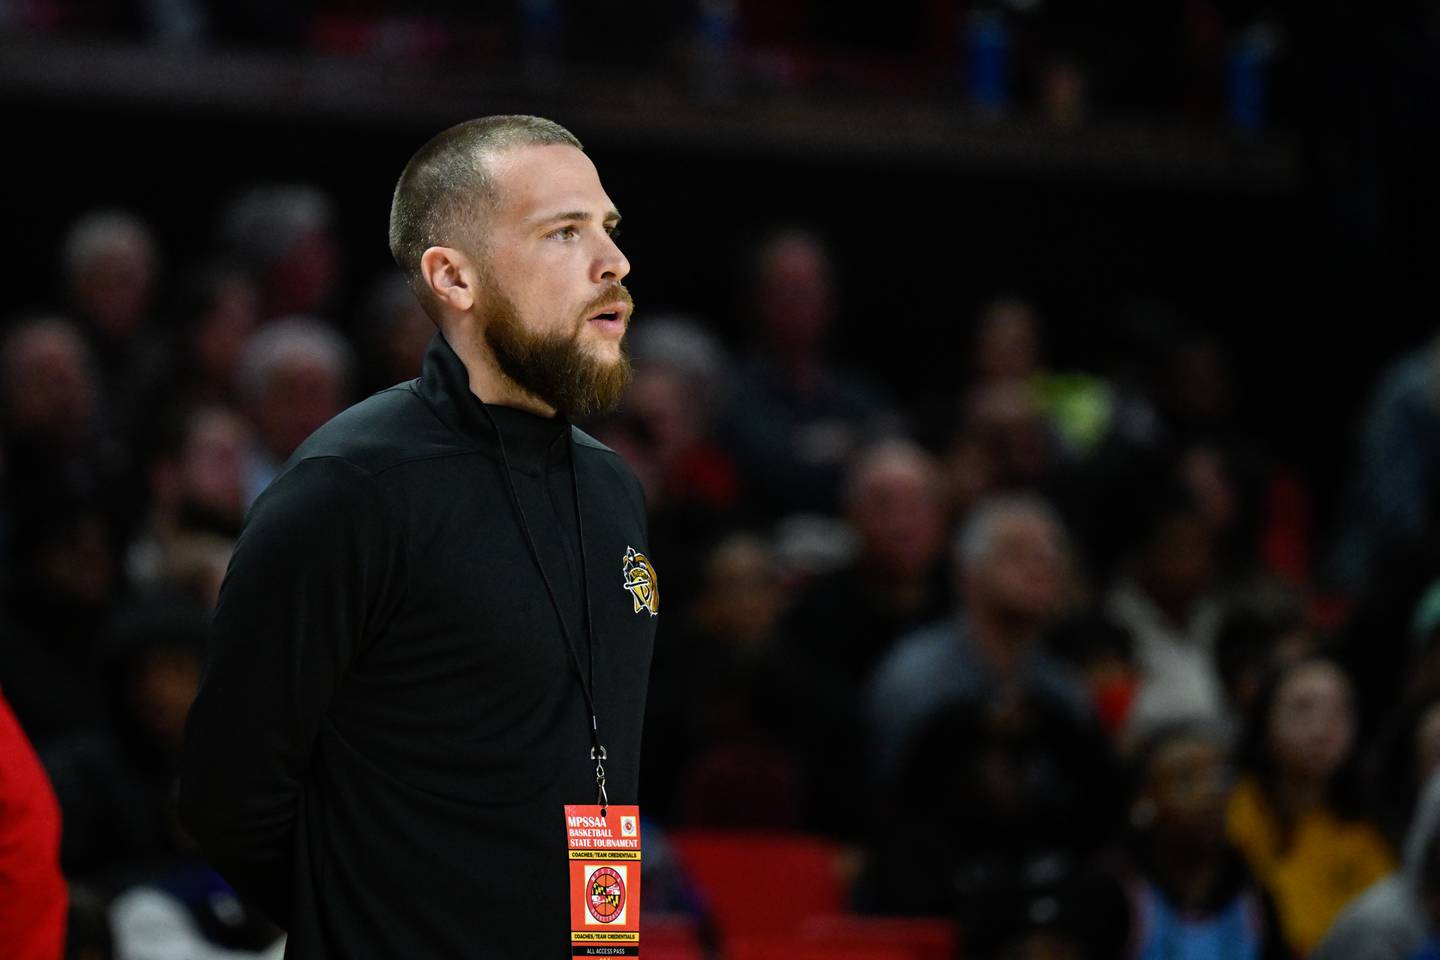 Parkville Knights head coach Josh Czerski looks on during the second half of the MPSSAA 4A Boys state basketball final against the Meade Mustangs, Saturday, March 11, 2023, in College Park.